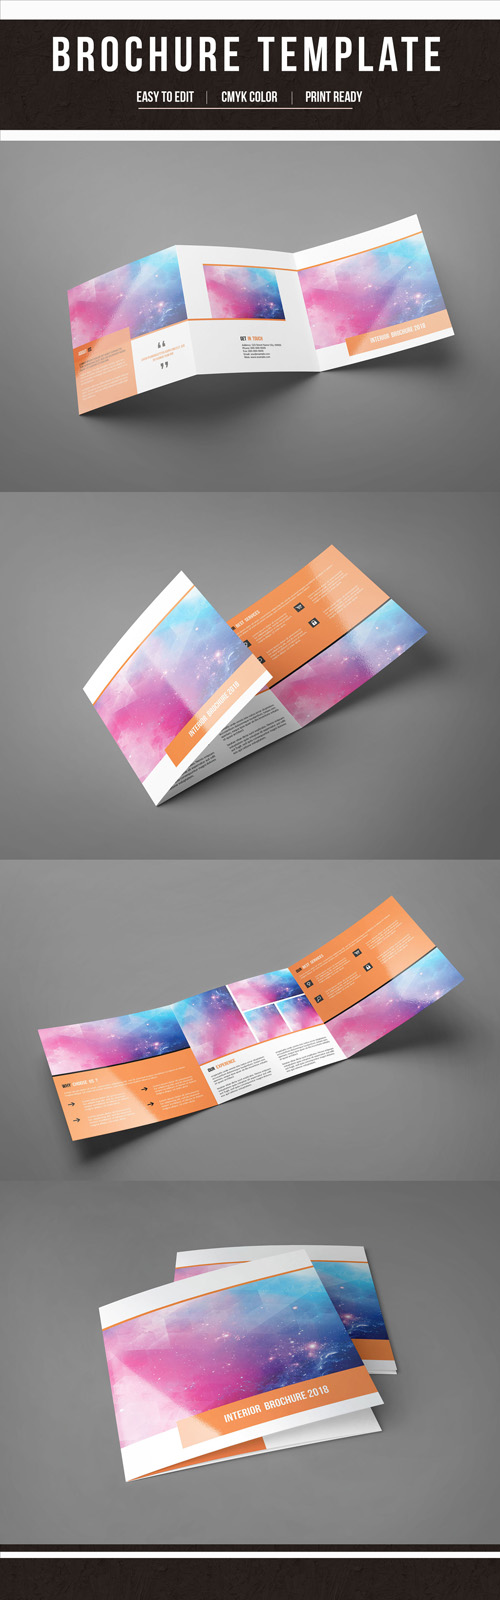 AdobeStock Square Trifold Brochure Layout with Orange Accents 199626929